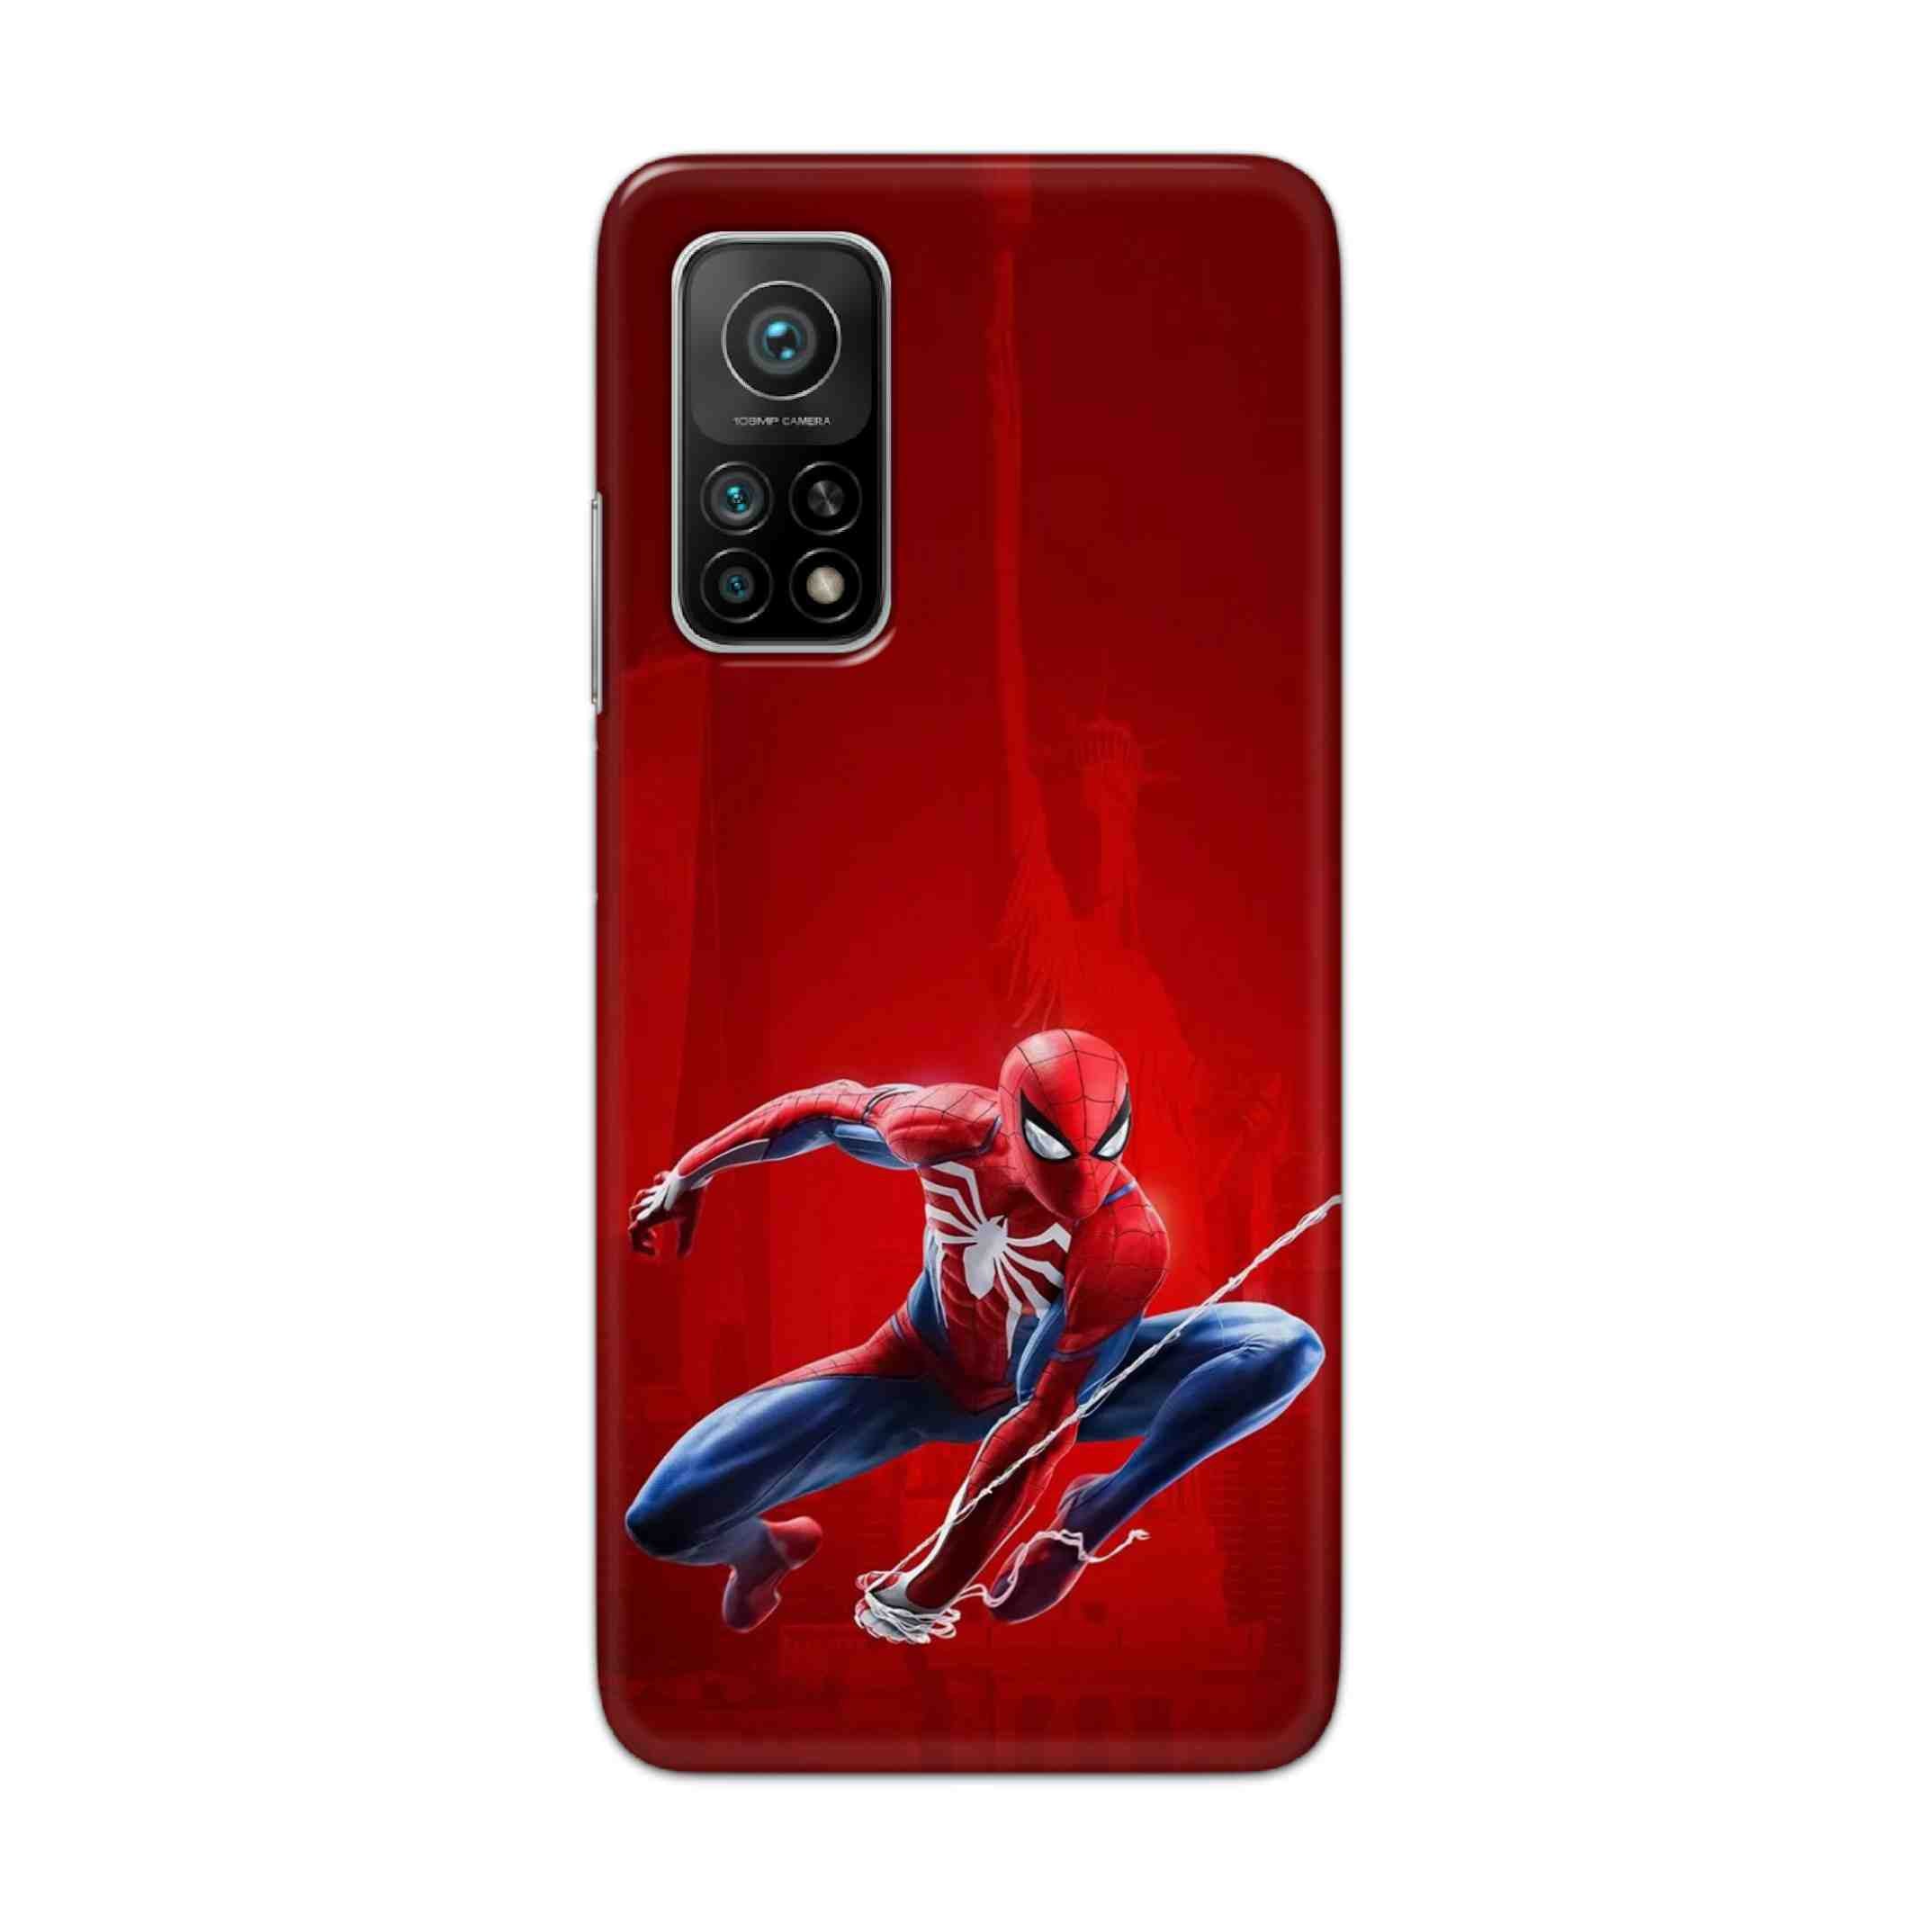 Buy Spiderman Hard Back Mobile Phone Case Cover For Xiaomi Mi 10T 5G Online